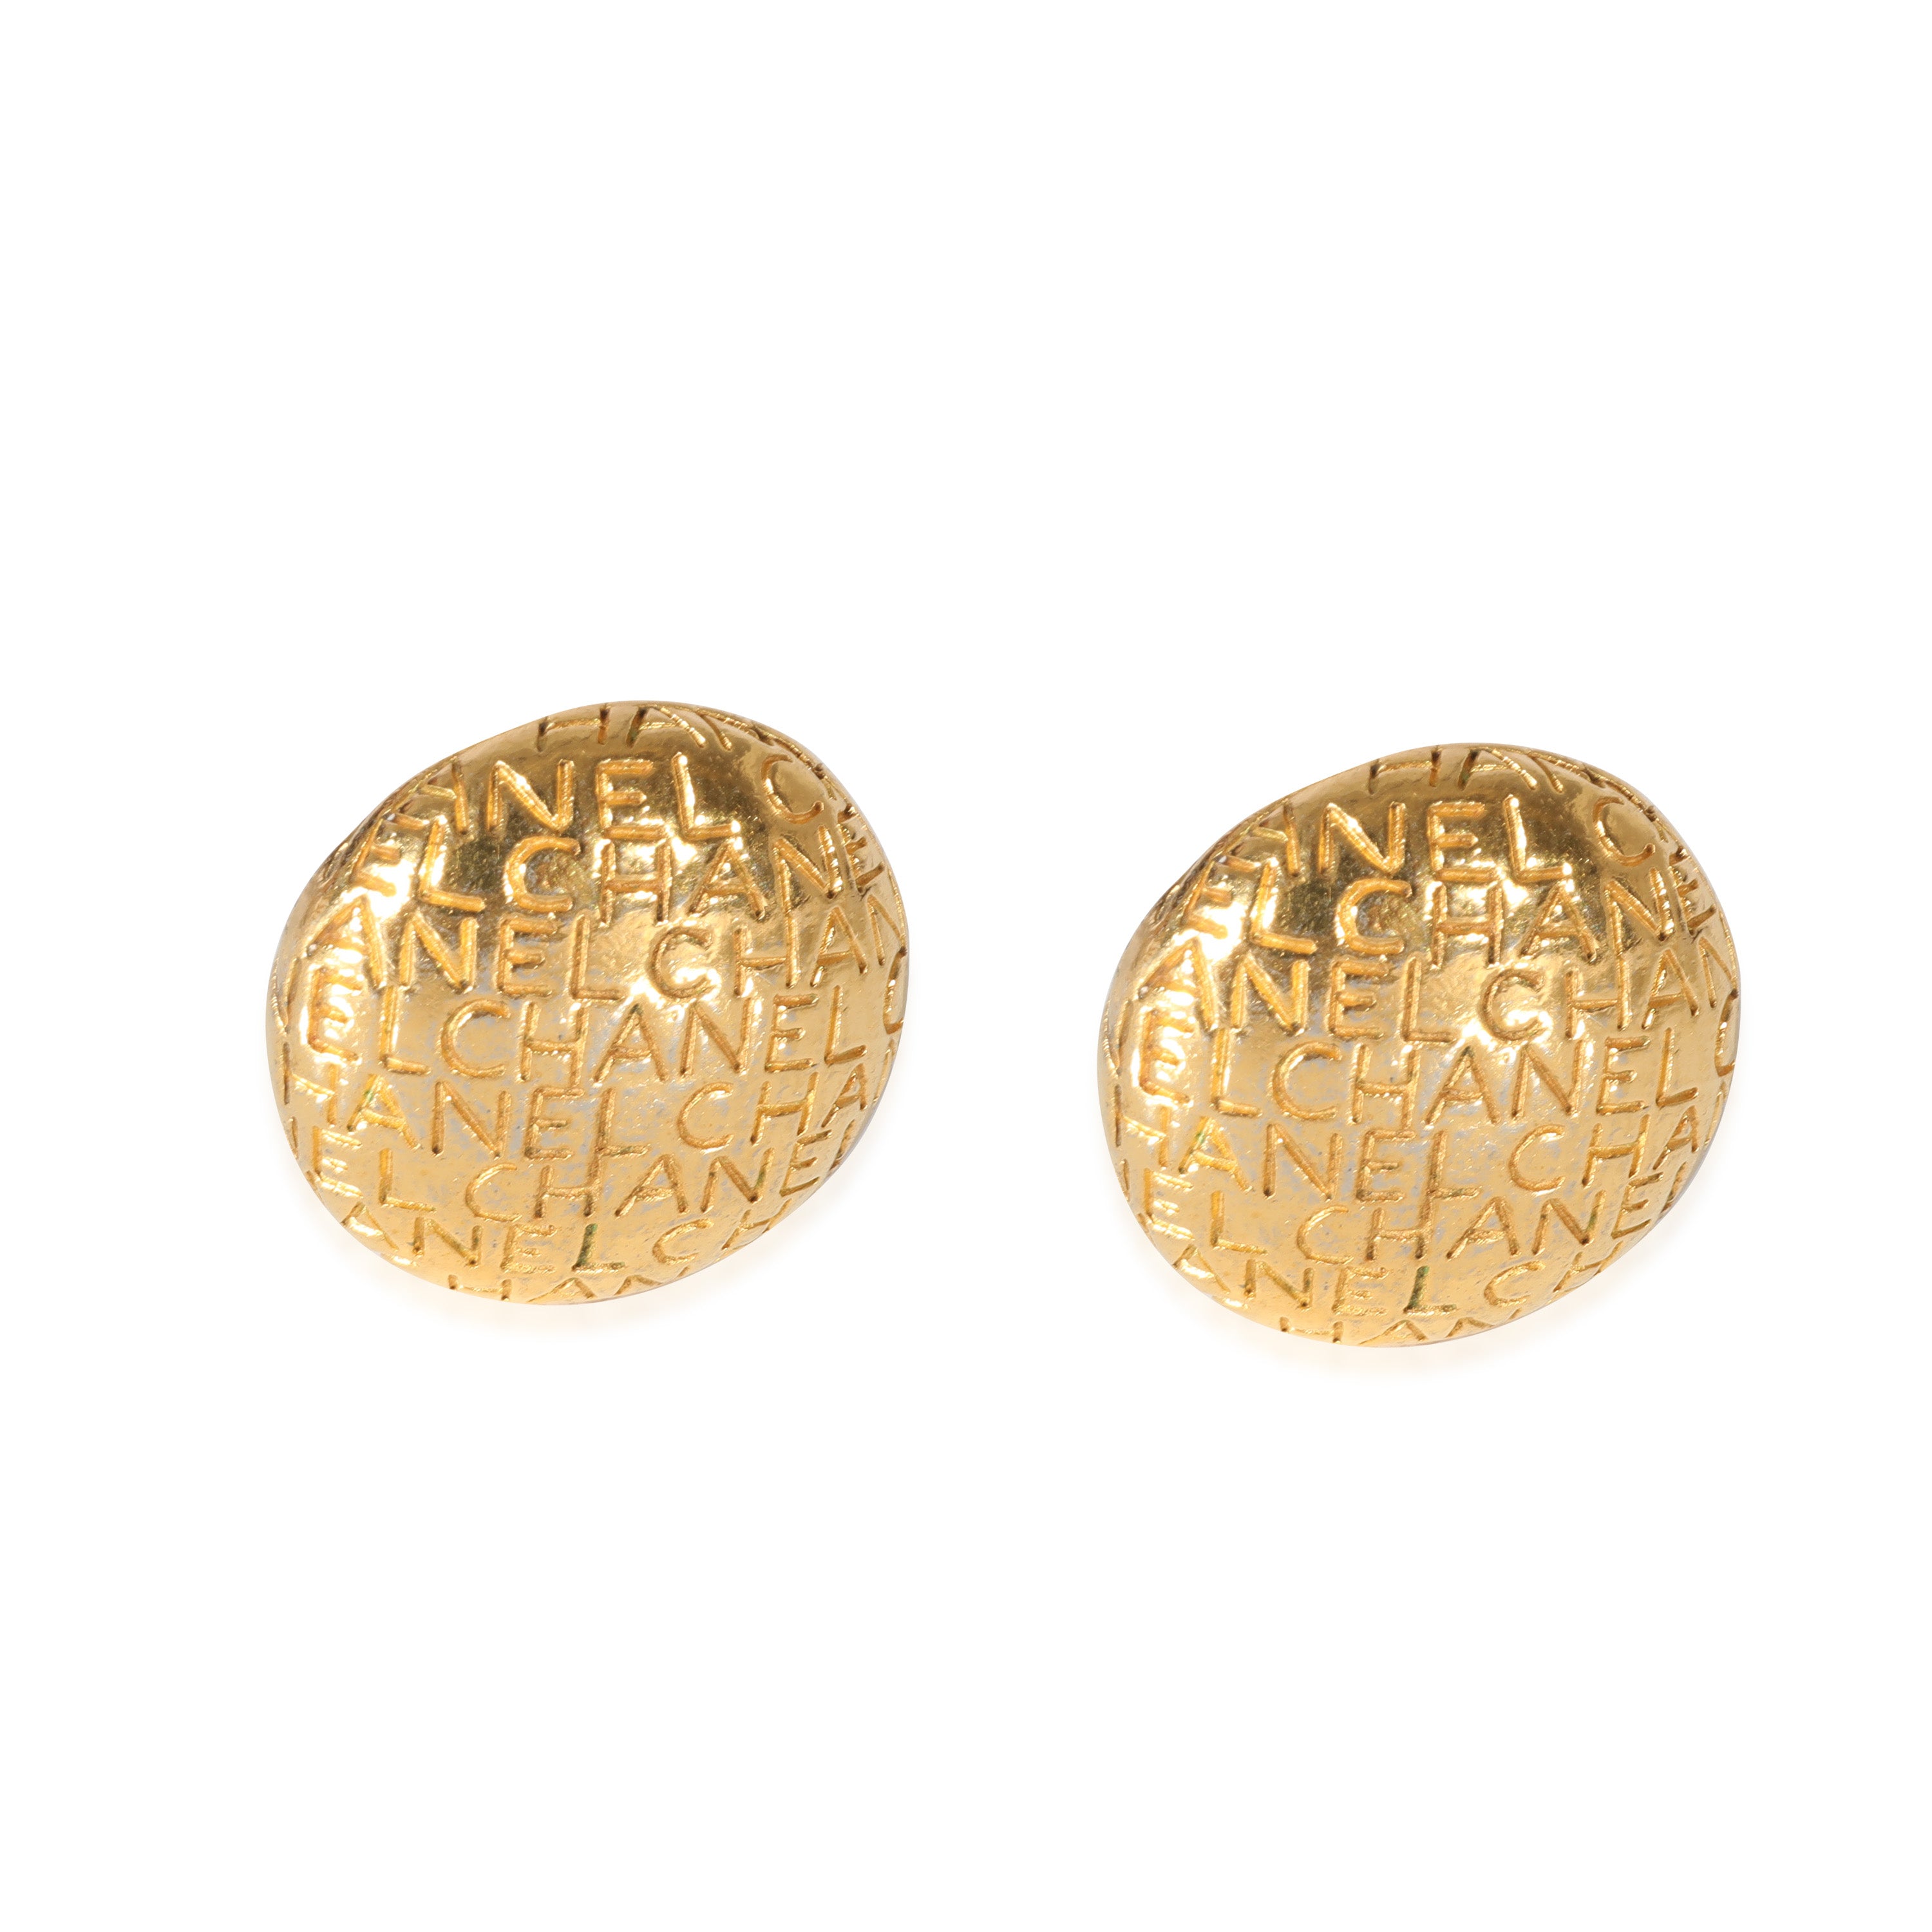 Chanel Coco Period Glass Bead and Rhinestones Earrings